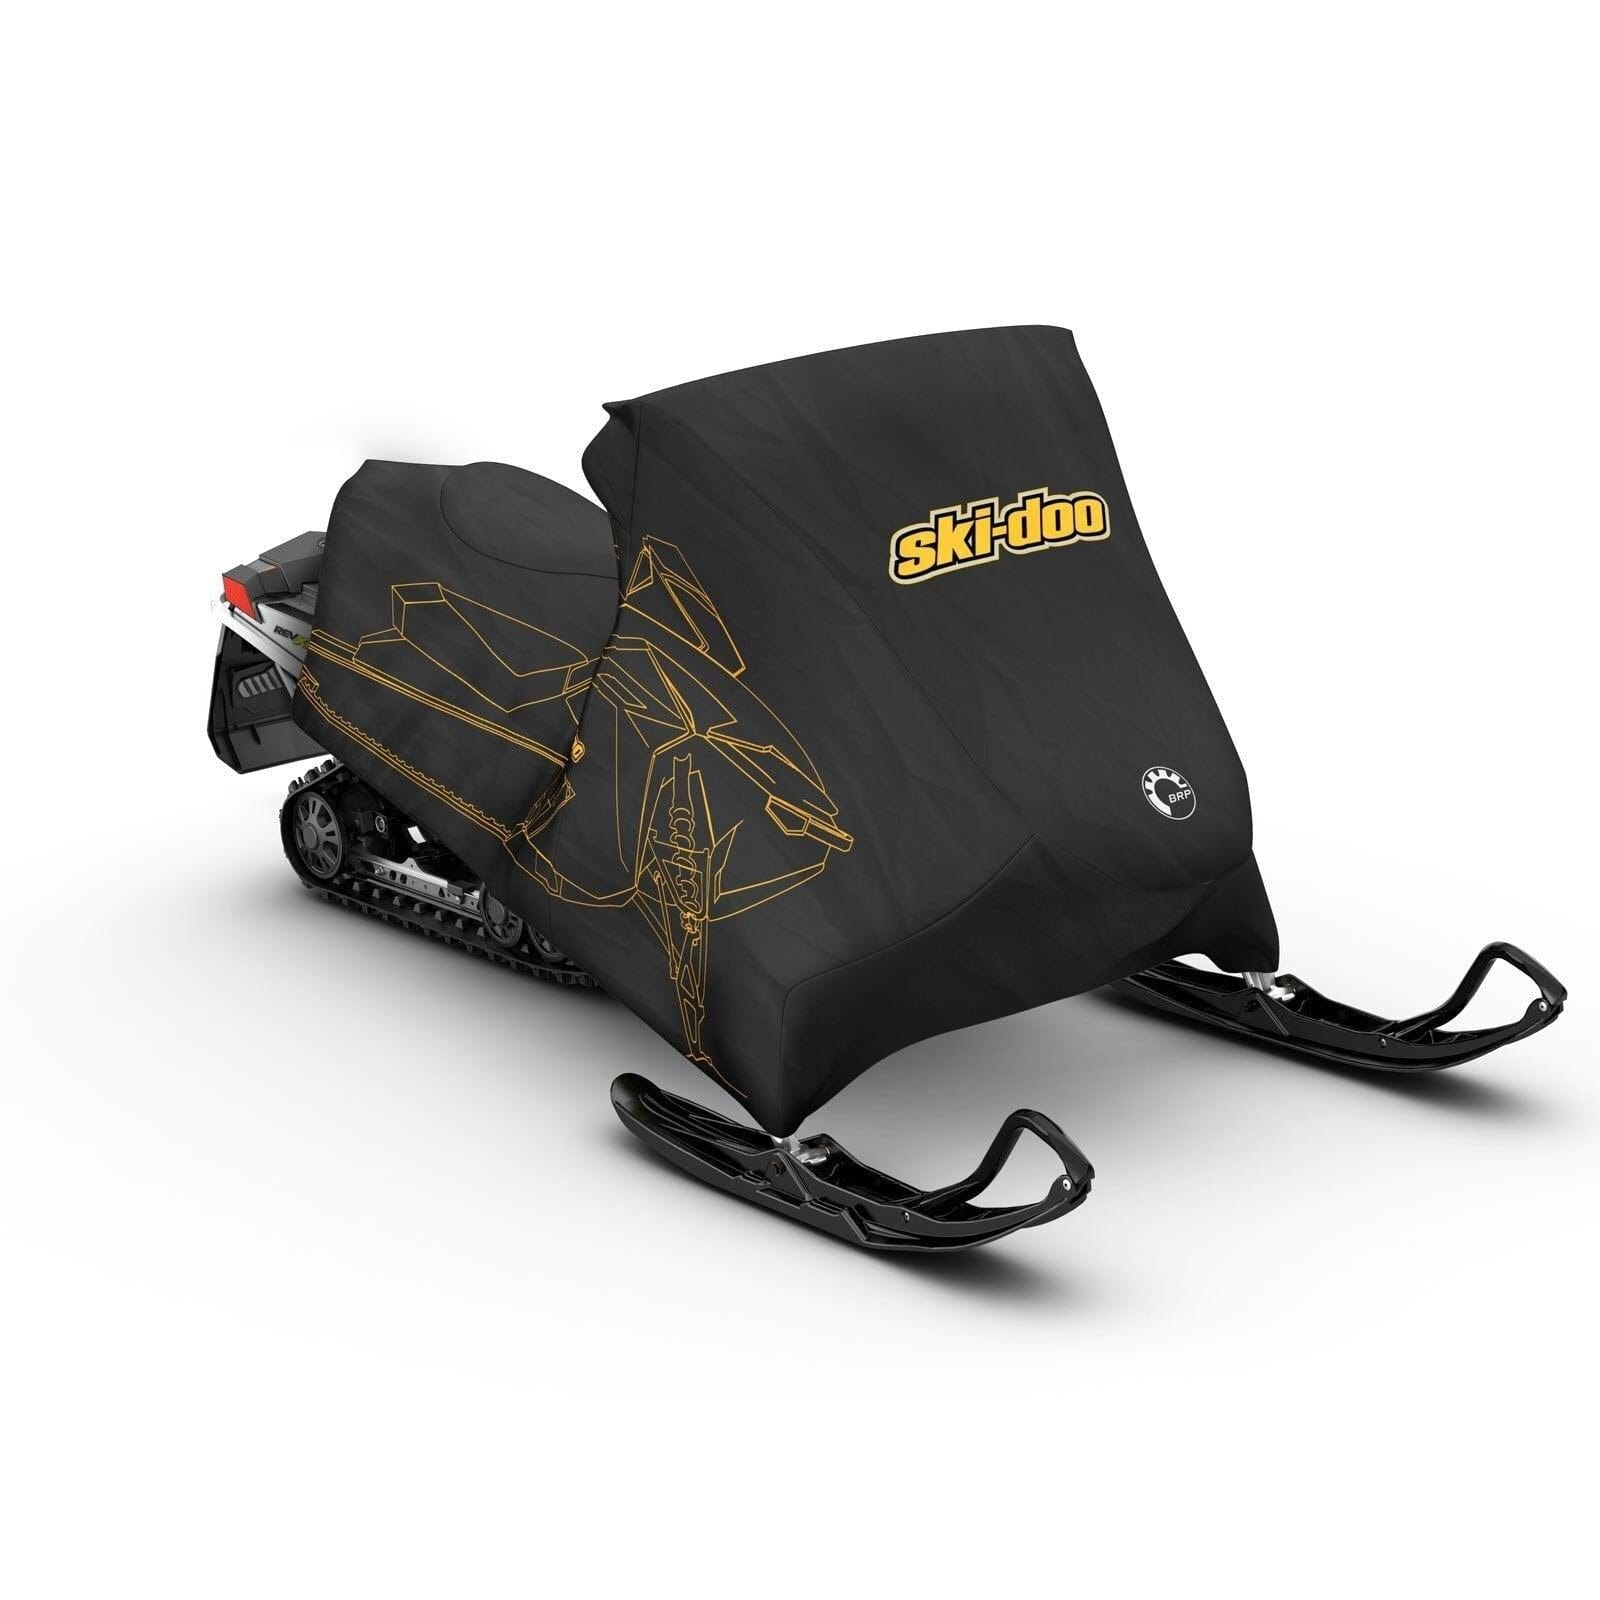 Shop Ski-doo Covers at Propowersports.ca | Propowersports.ca